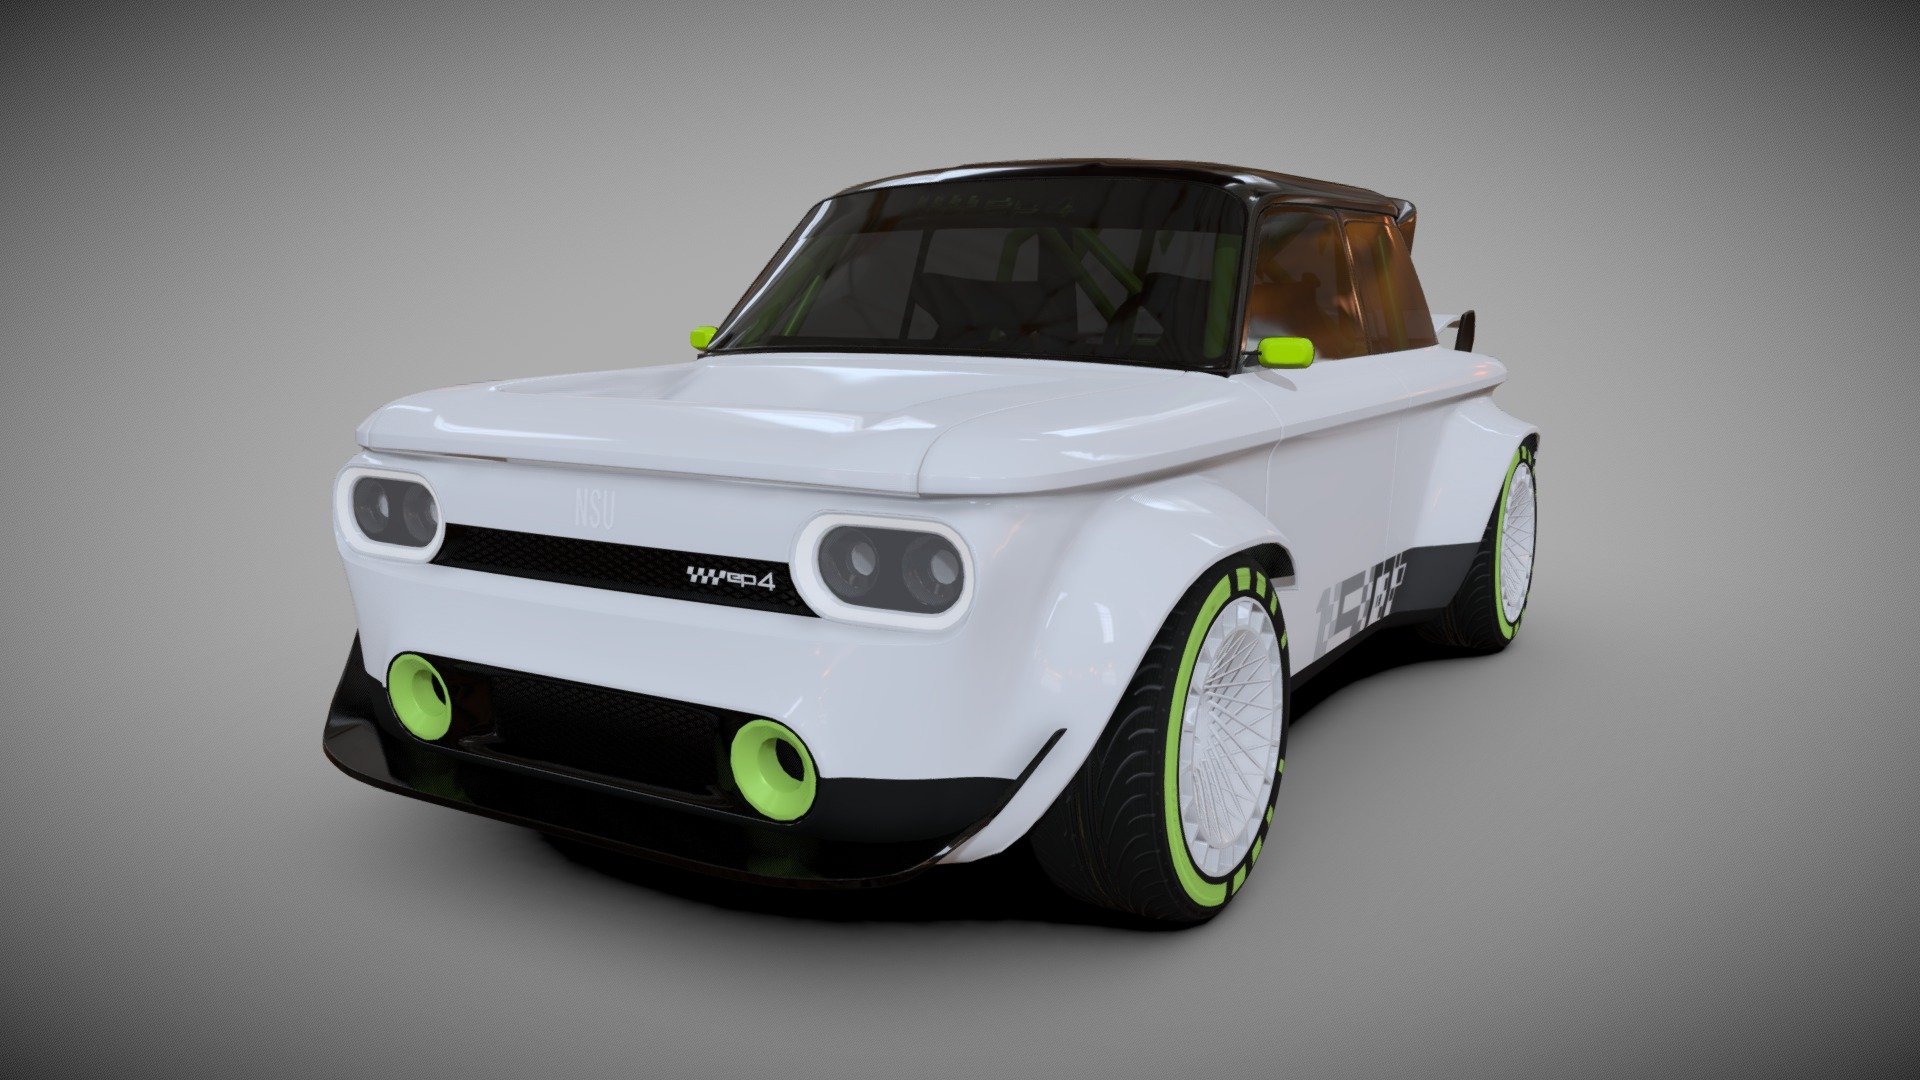 electrified concept car based on the NSU Prinz 4 which was an iconic classic car 3d model